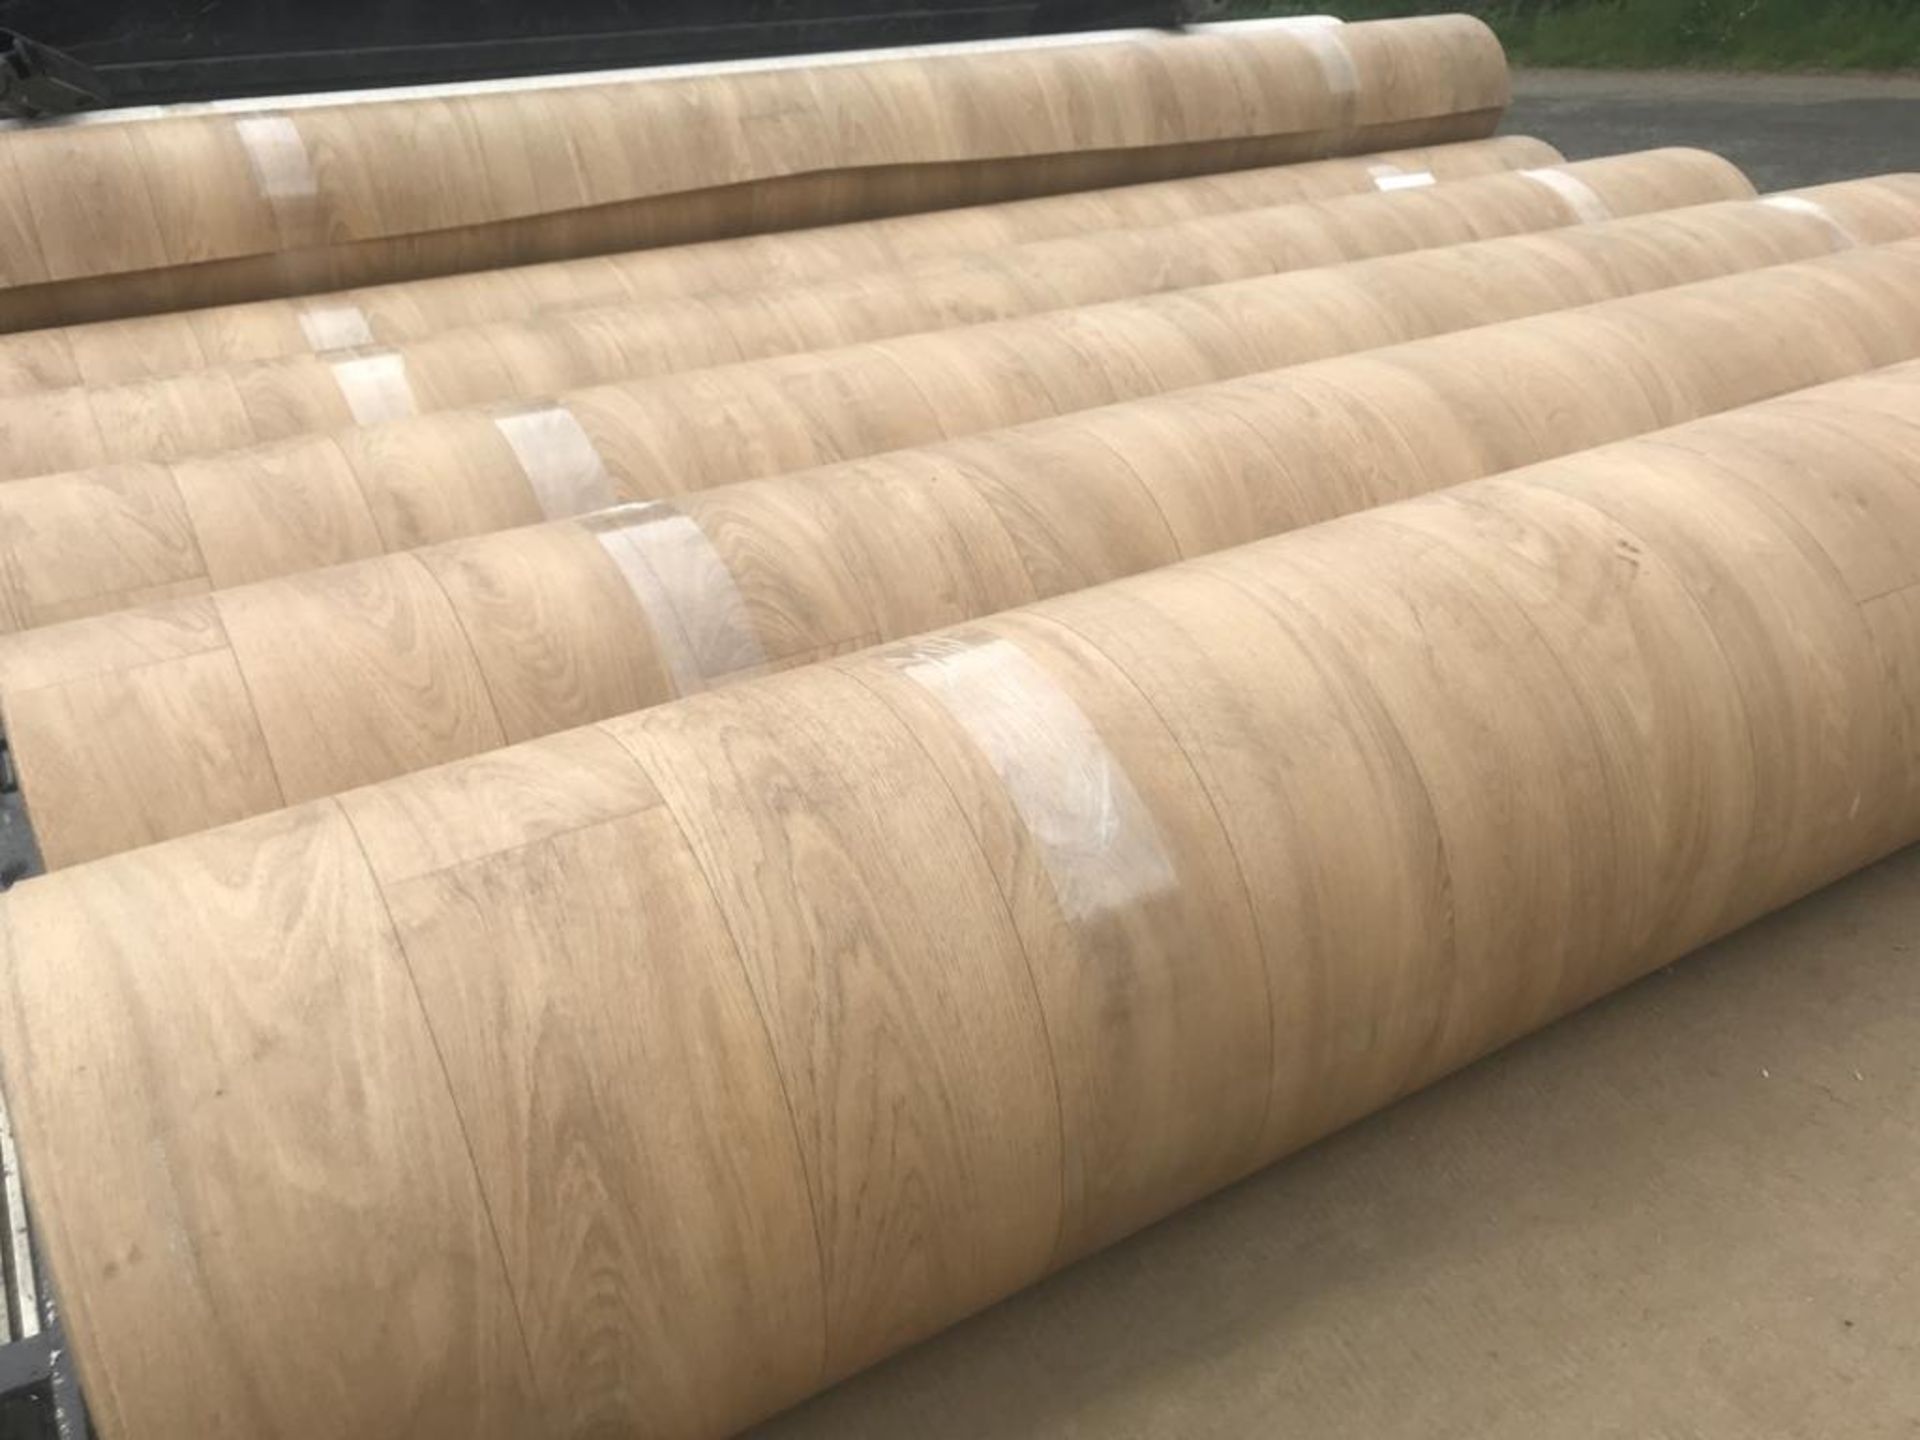 10x2m Heavy Duty Safety Flooring Colour Natural Oak     10x2m total 20m2 per Roll heavy-duty - Image 2 of 3